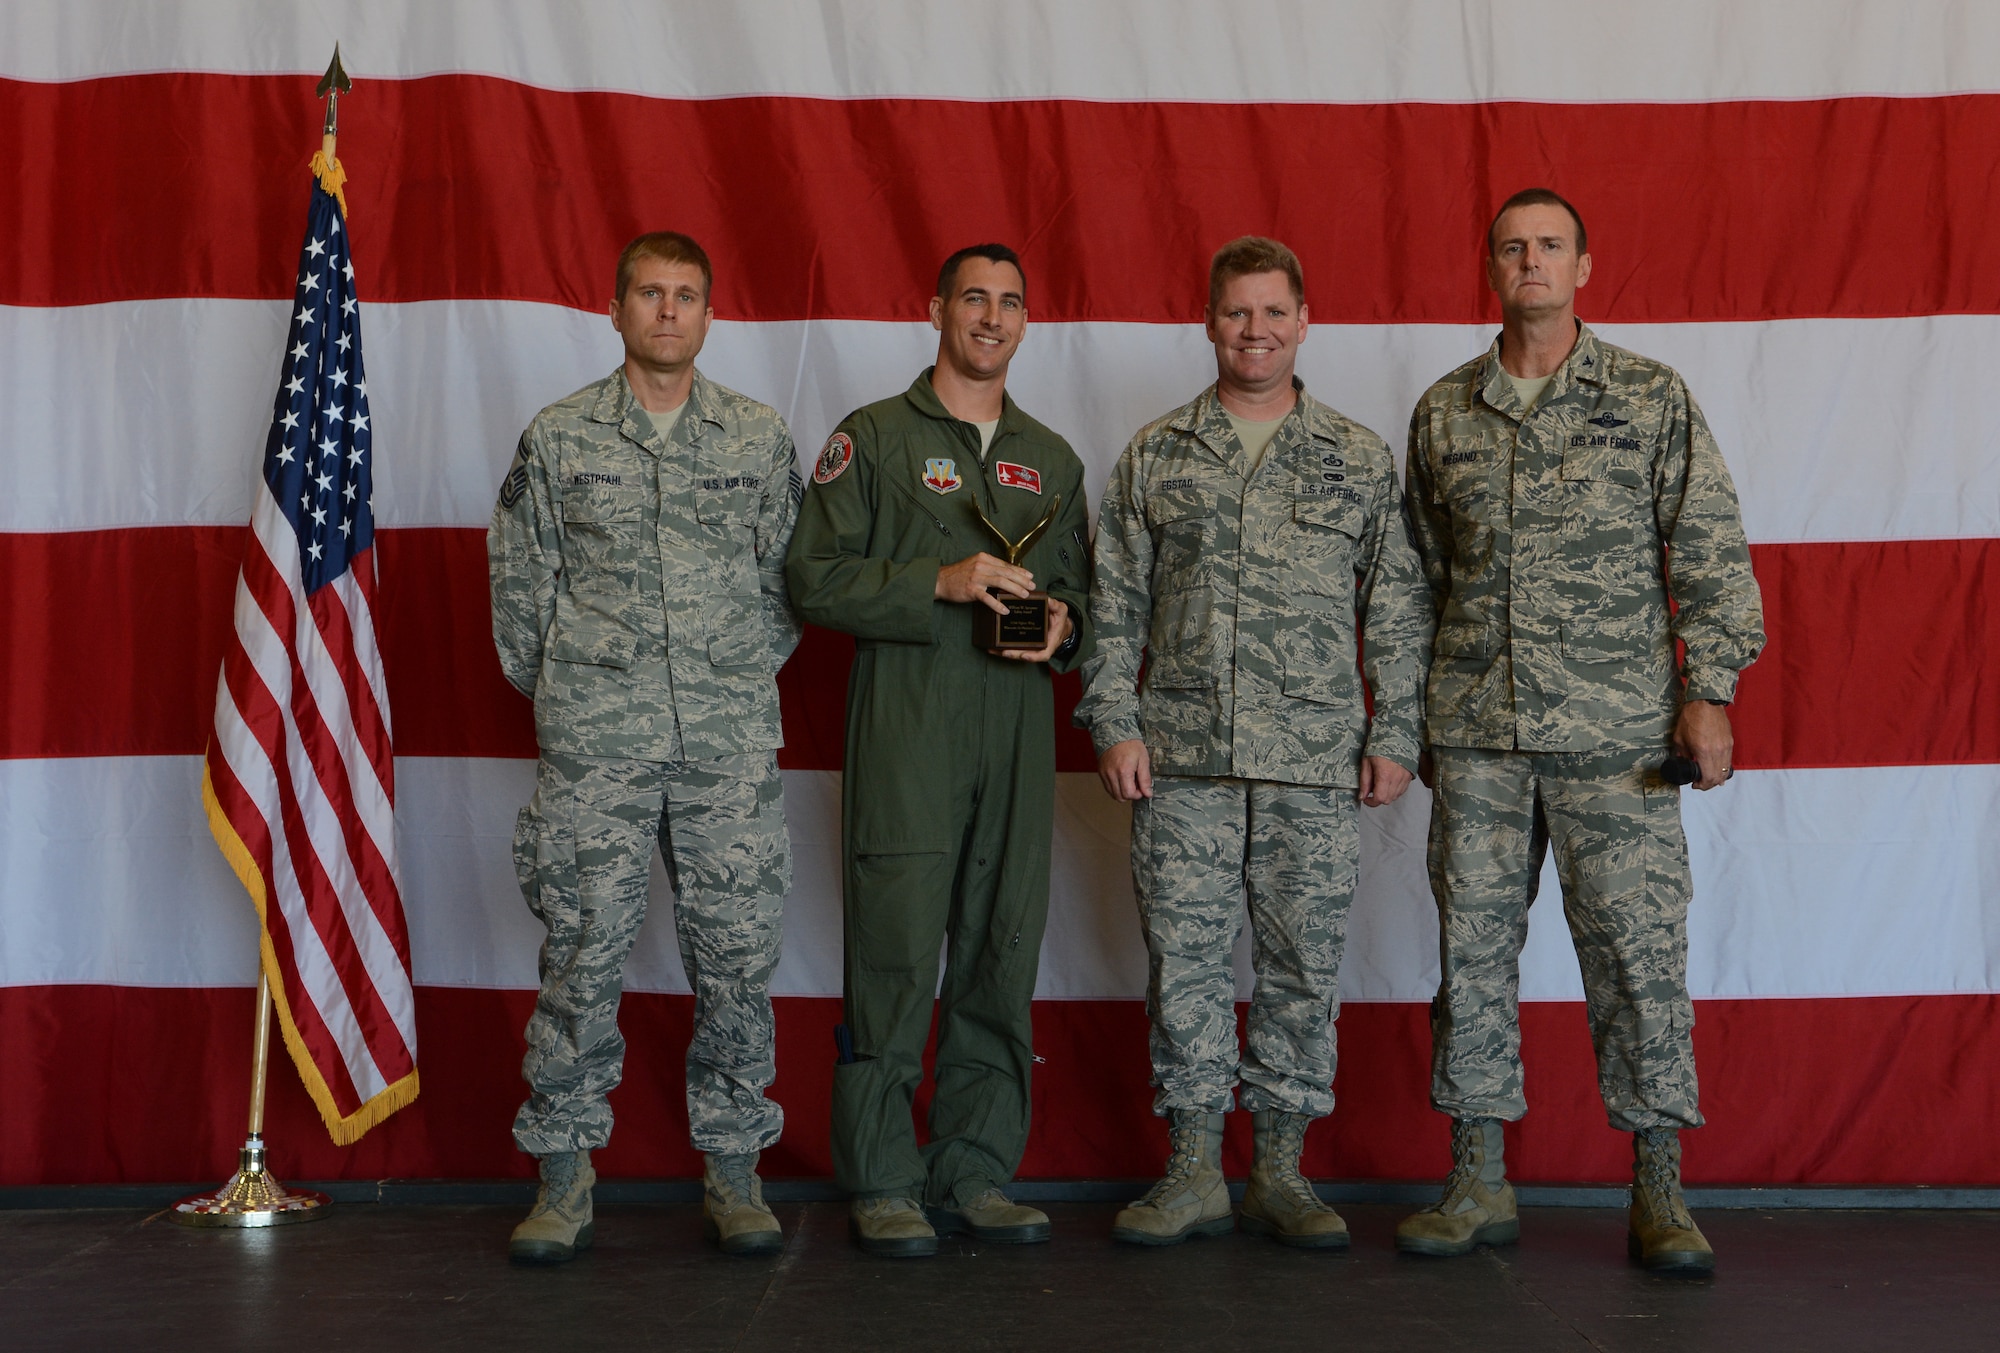 Members of the 115th Fighter Wing safety team pose on stage after being presented the 2013 William W. Spruance Award during Wingman Day in Madison, Wis., on Sept. 7, 2014. The award was originally presented during the 136th General Conference and Exhibition, however this was the first chance the entire unit was able to see it. (Air National Guard photo by Senior Airman Andrea F. Liechti)